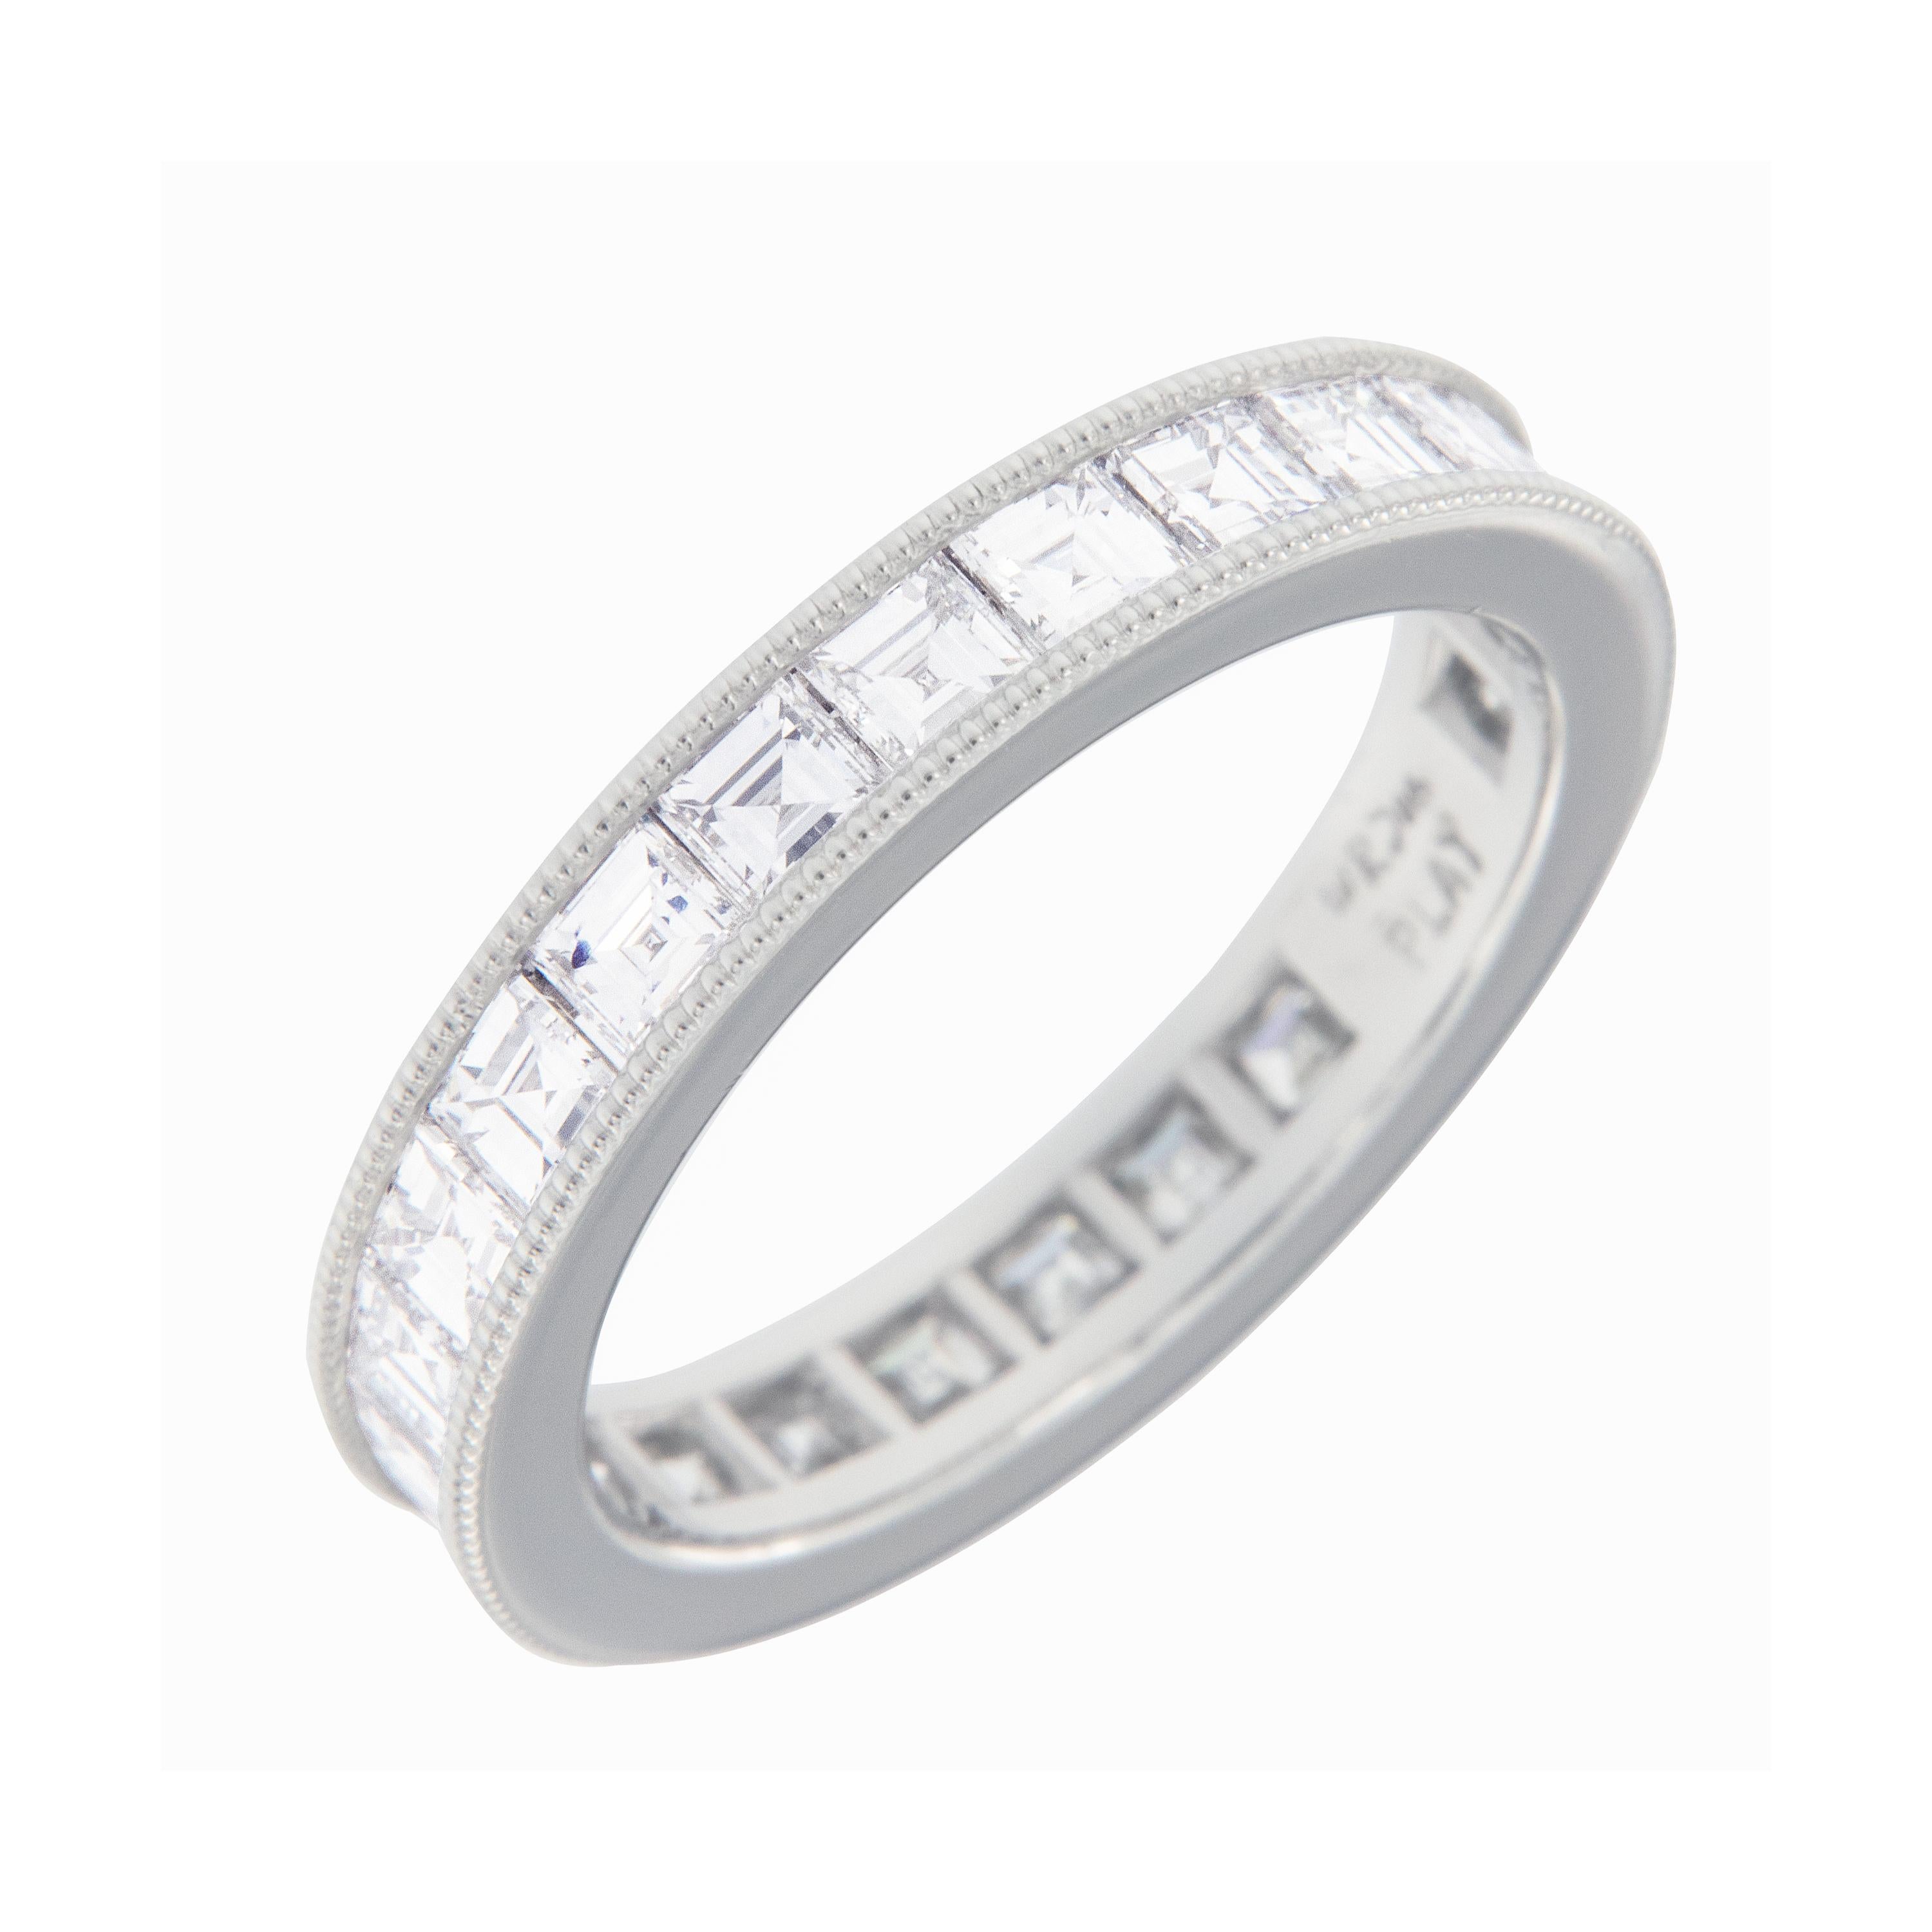 Very rare-The Carre cut is seldom seen in todays jewelry. With emphasis on the diamond’s subdued beauty it has long, open facets that display the clarity and color of the diamond and allows you to see deep into the stone. Ring is made of noble